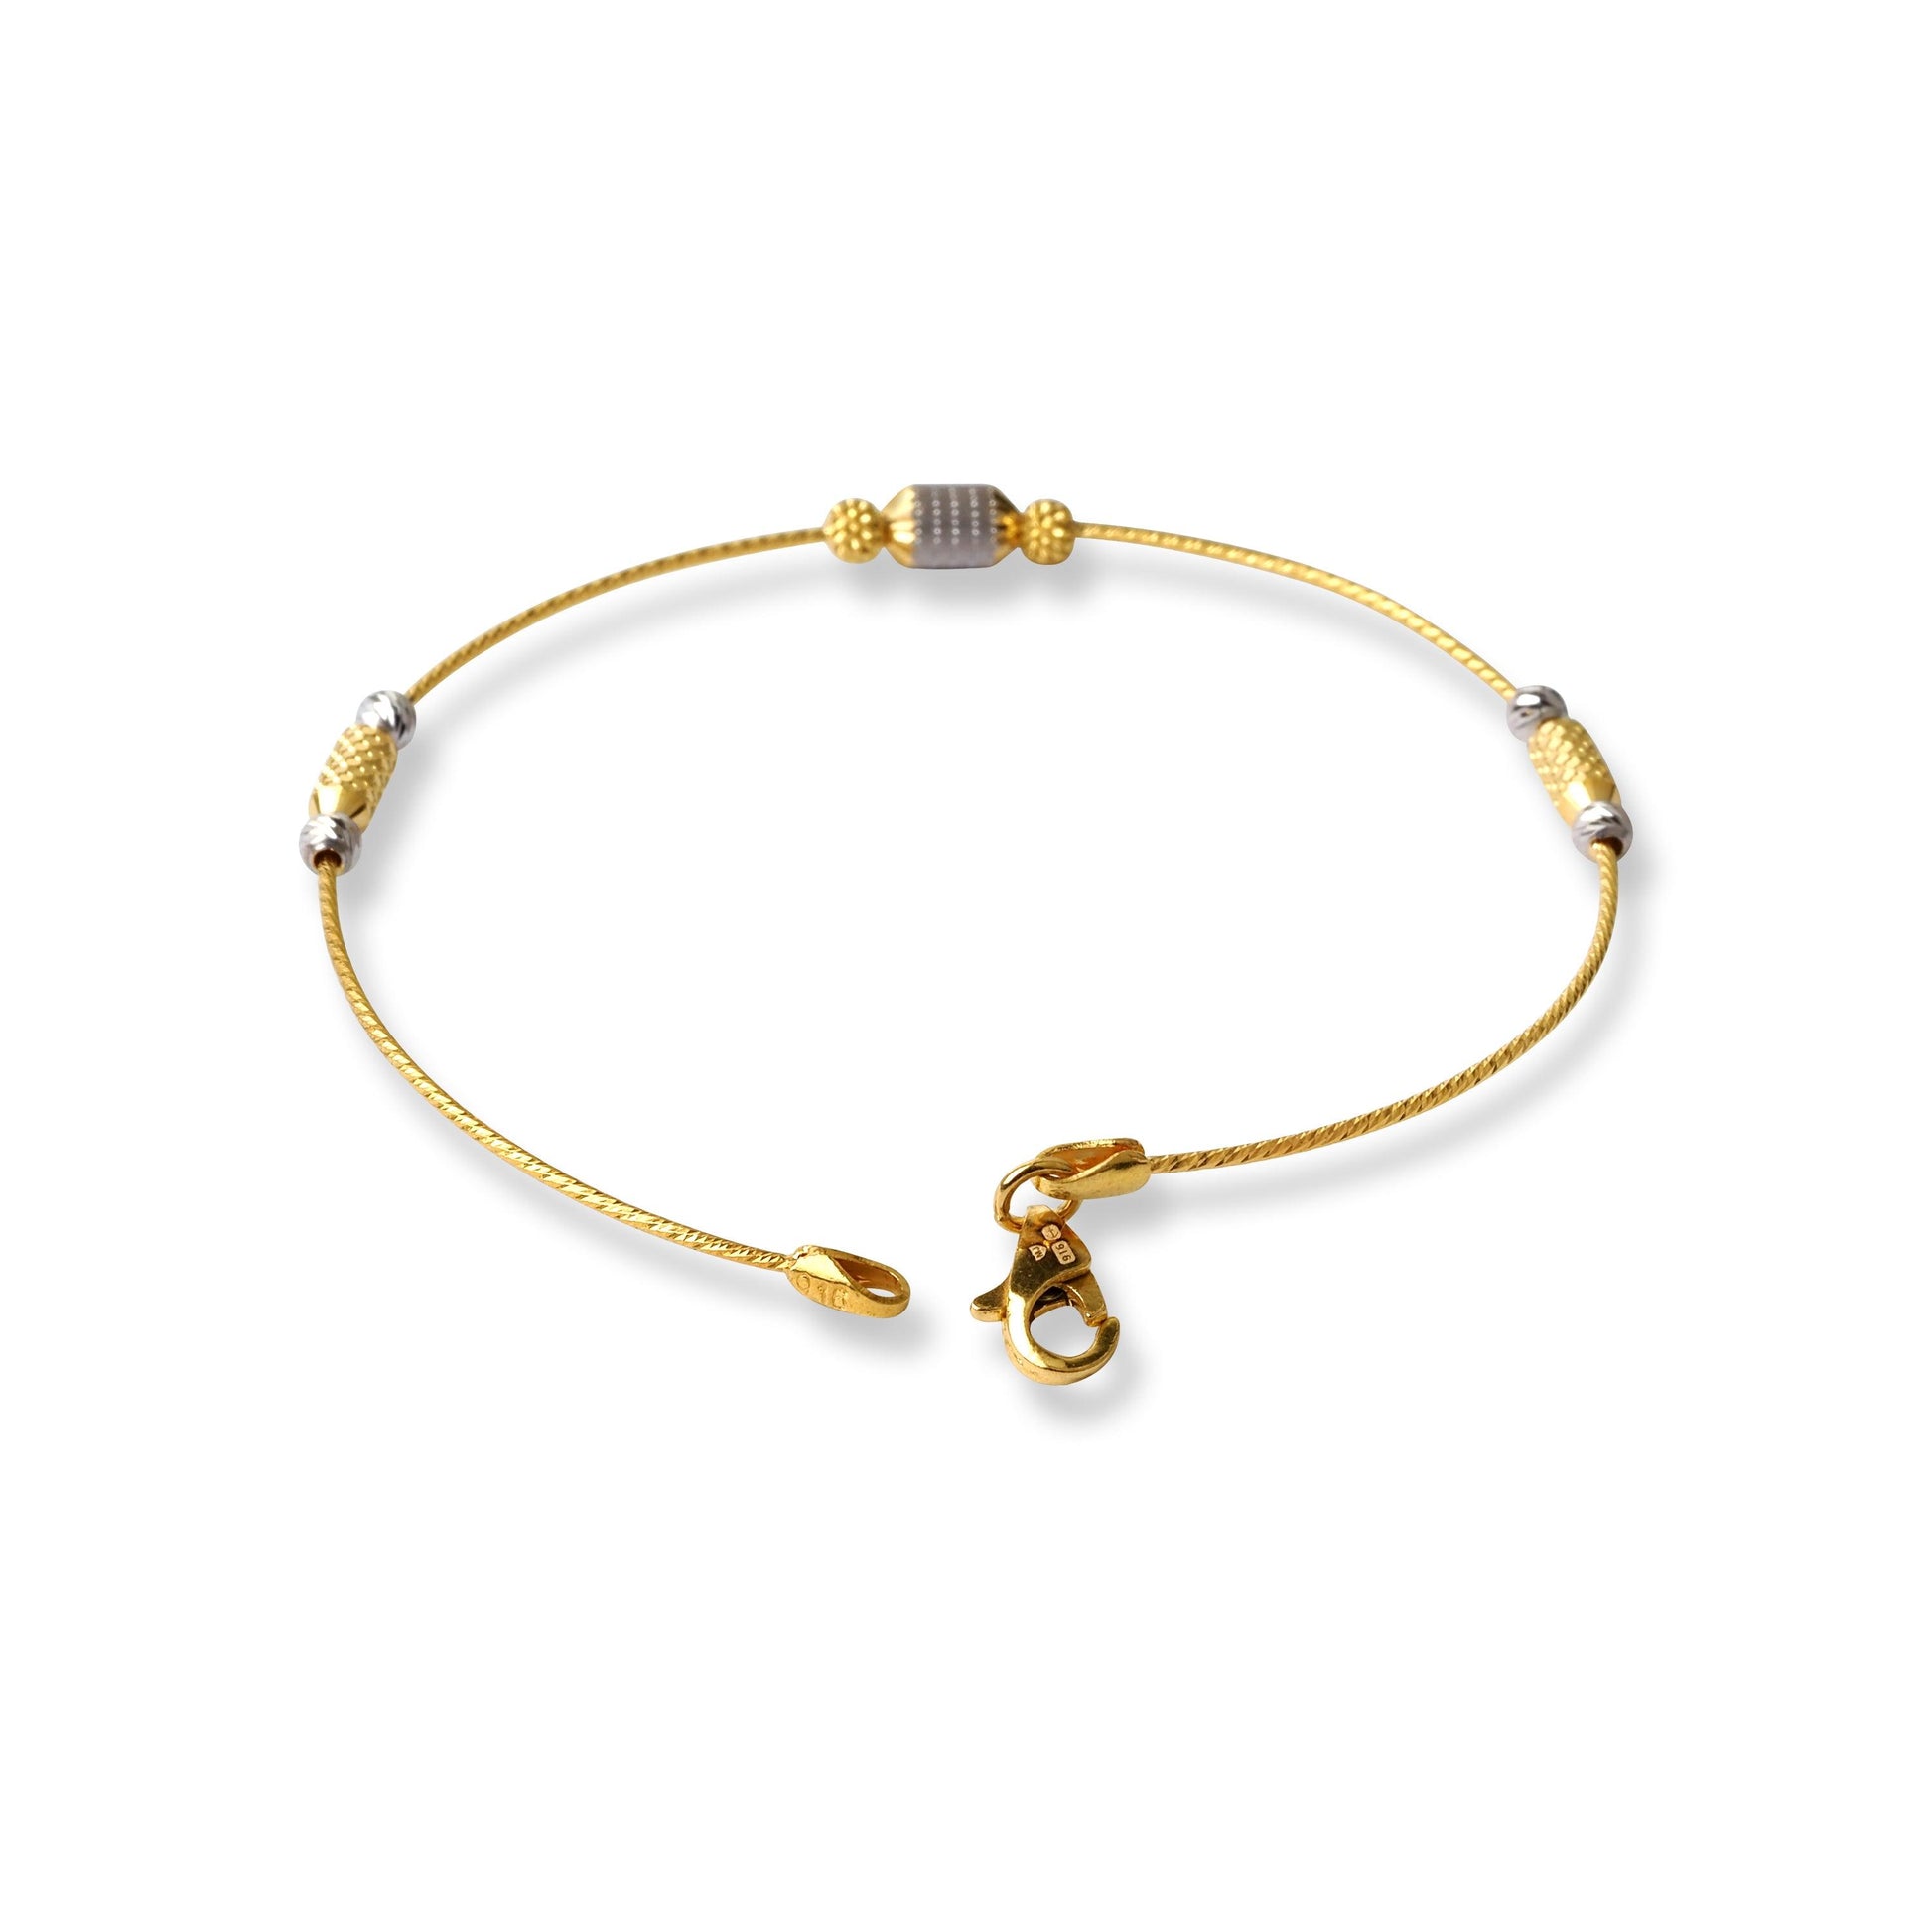 22ct Gold Rhodium Plated Beads Bangle With Rounded Trigger Clasp (4.0G) B-8536 - Minar Jewellers